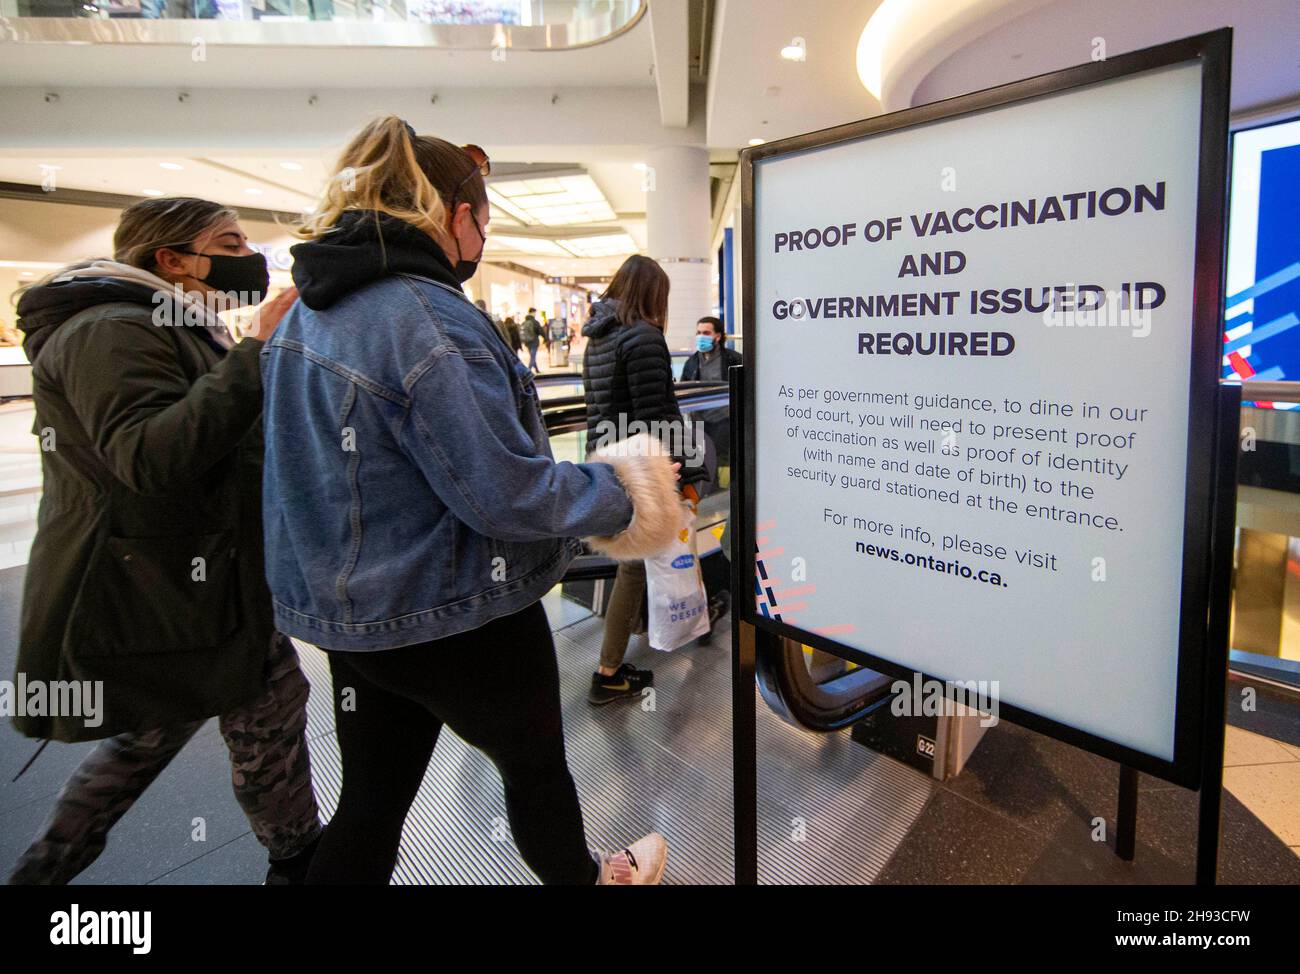 Toronto, Canada. 3rd Dec, 2021. A notice to require proof of COVID-19 vaccination is seen at the entrance of a food court at a shopping center in Toronto, Canada, on Dec. 3, 2021. Canada reported new 2,827 COVID-19 cases Friday evening, raising the cumulative total to 1,801,951 cases with 29,751 deaths, according to CTV. Credit: Zou Zheng/Xinhua/Alamy Live News Stock Photo